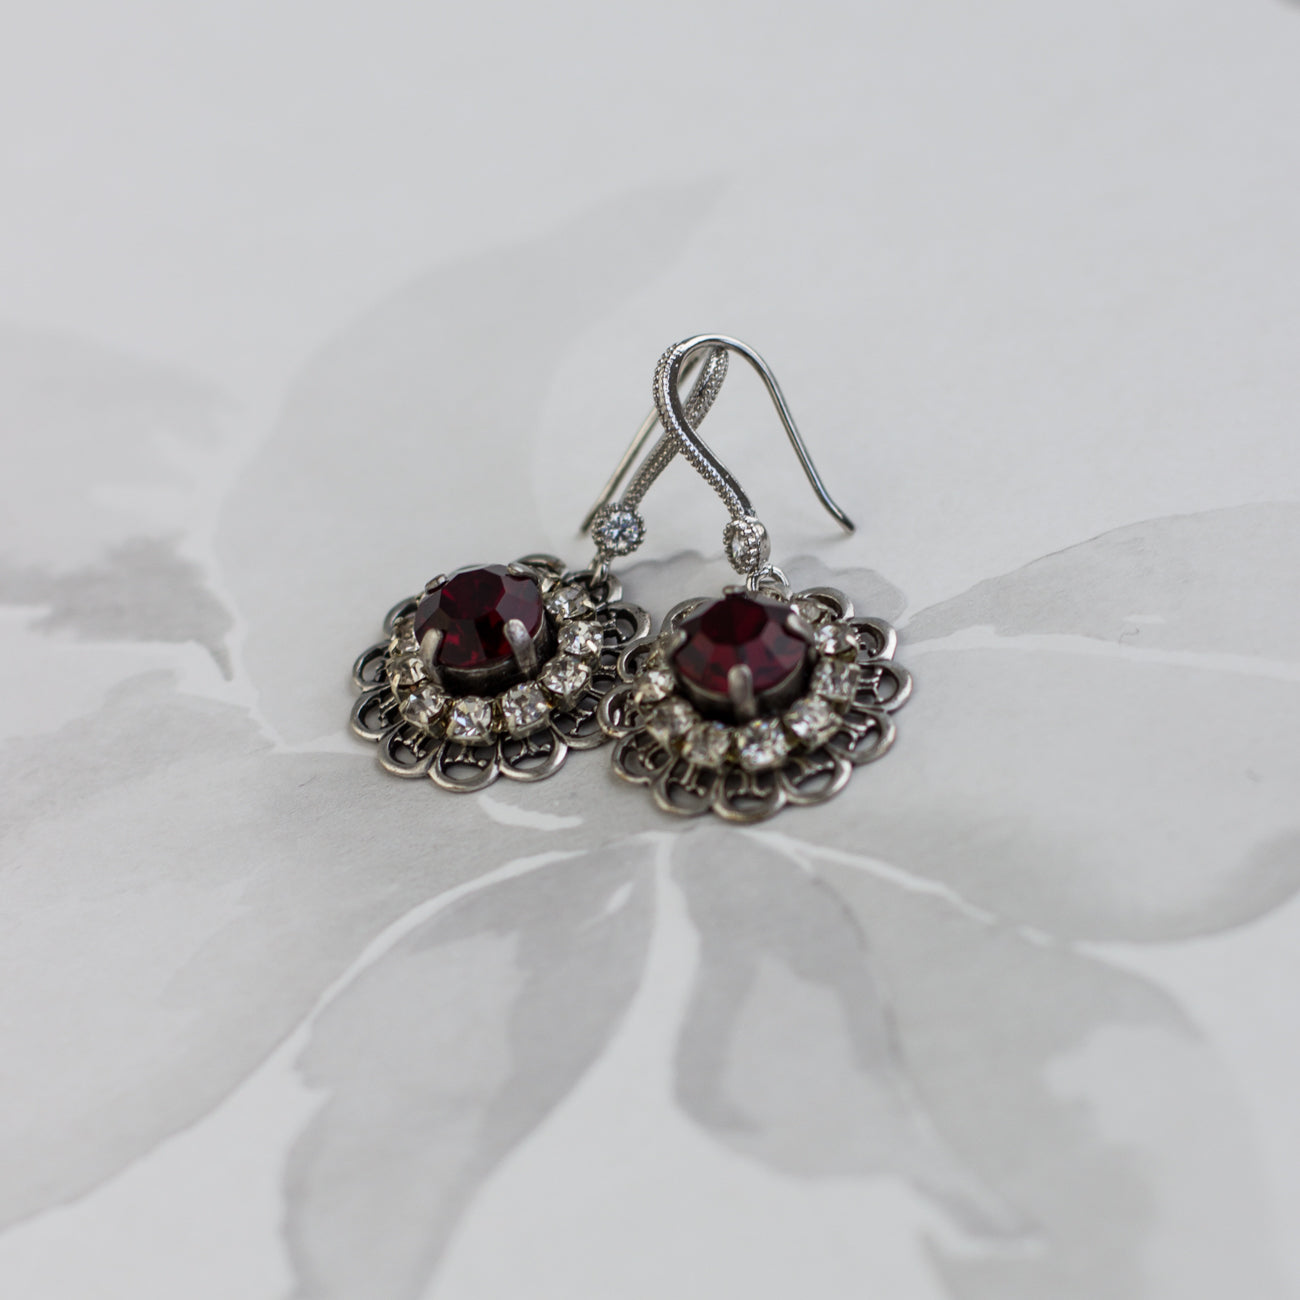 Siam red jewelry. Swarovski crystal earrings. Delicate small and stylish crystal earrings. Occasion jewelry. Timeless elegance accessories.